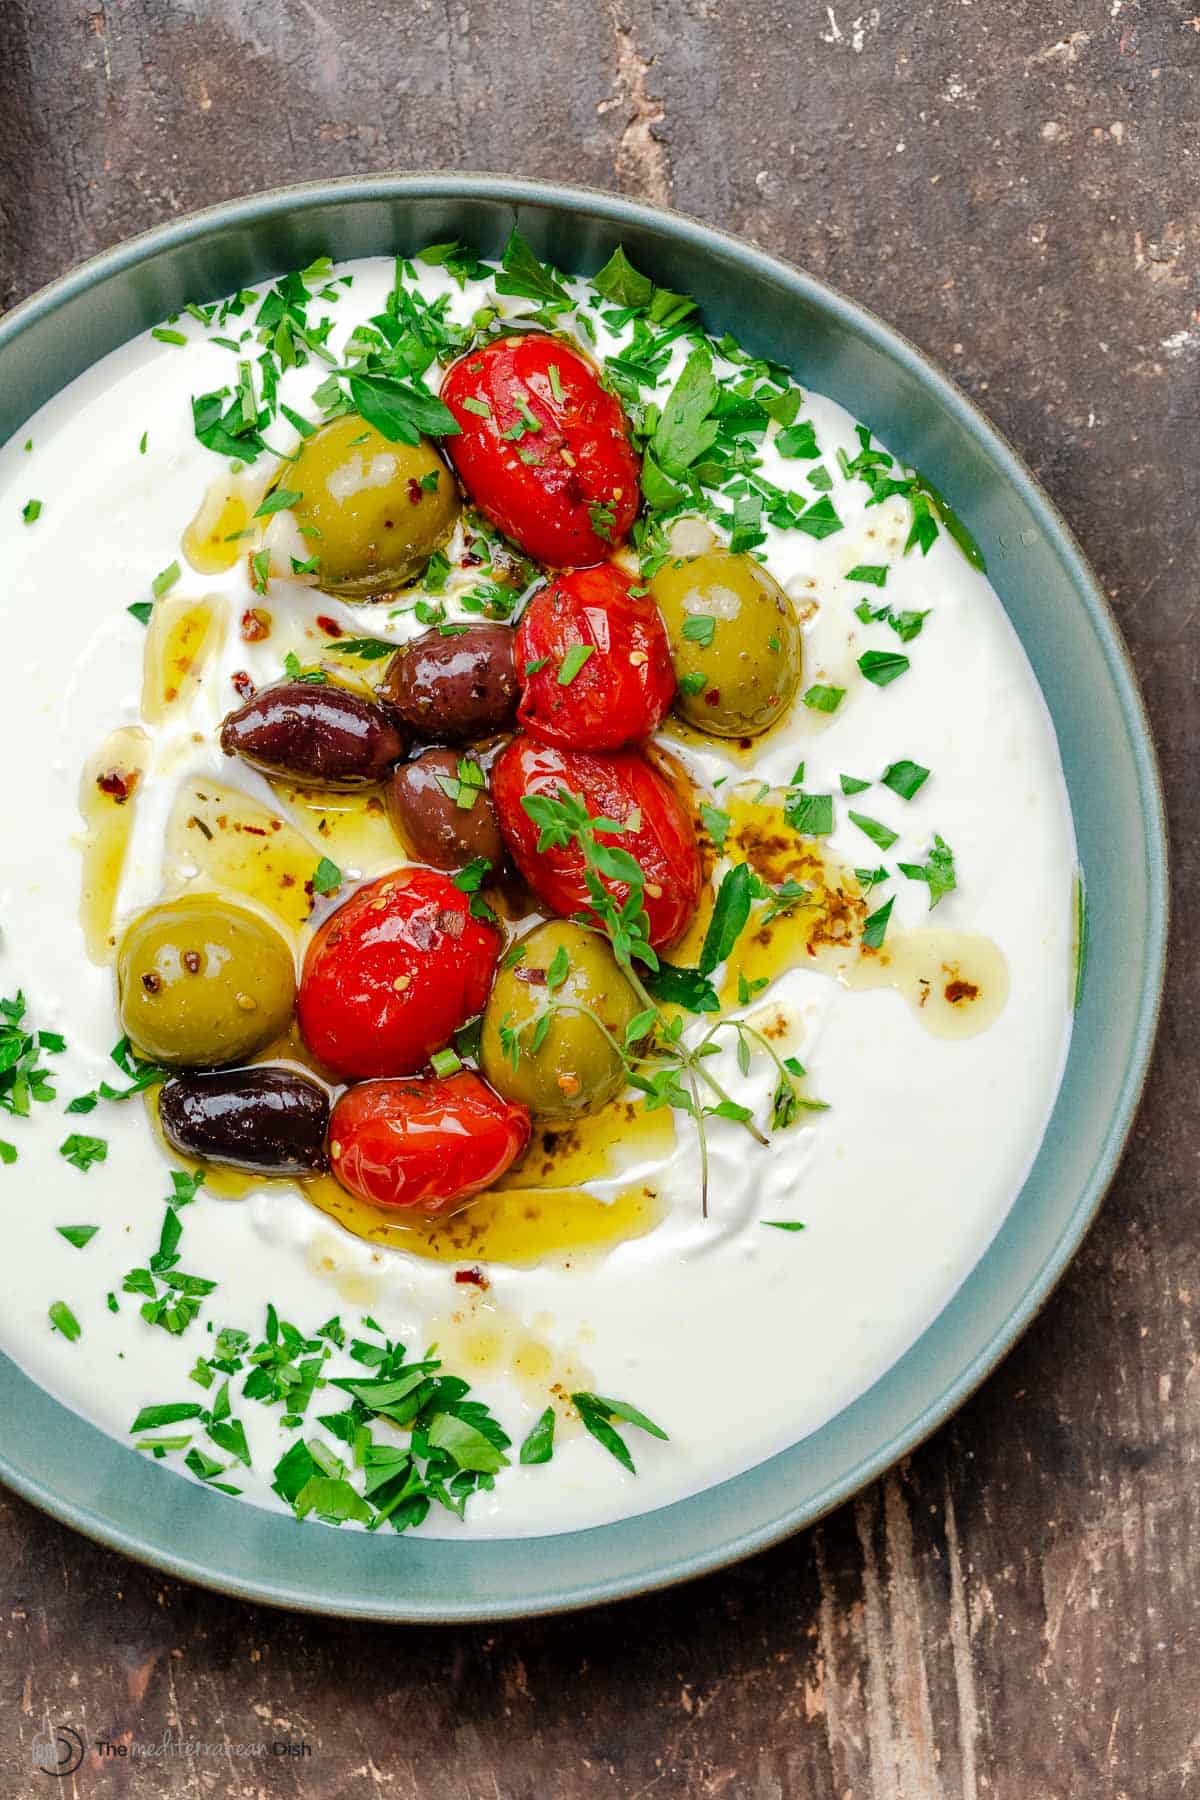 whipped labneh dip in a bowl topped with warmed olives and tomatoes in olive oil, garnished with parsley